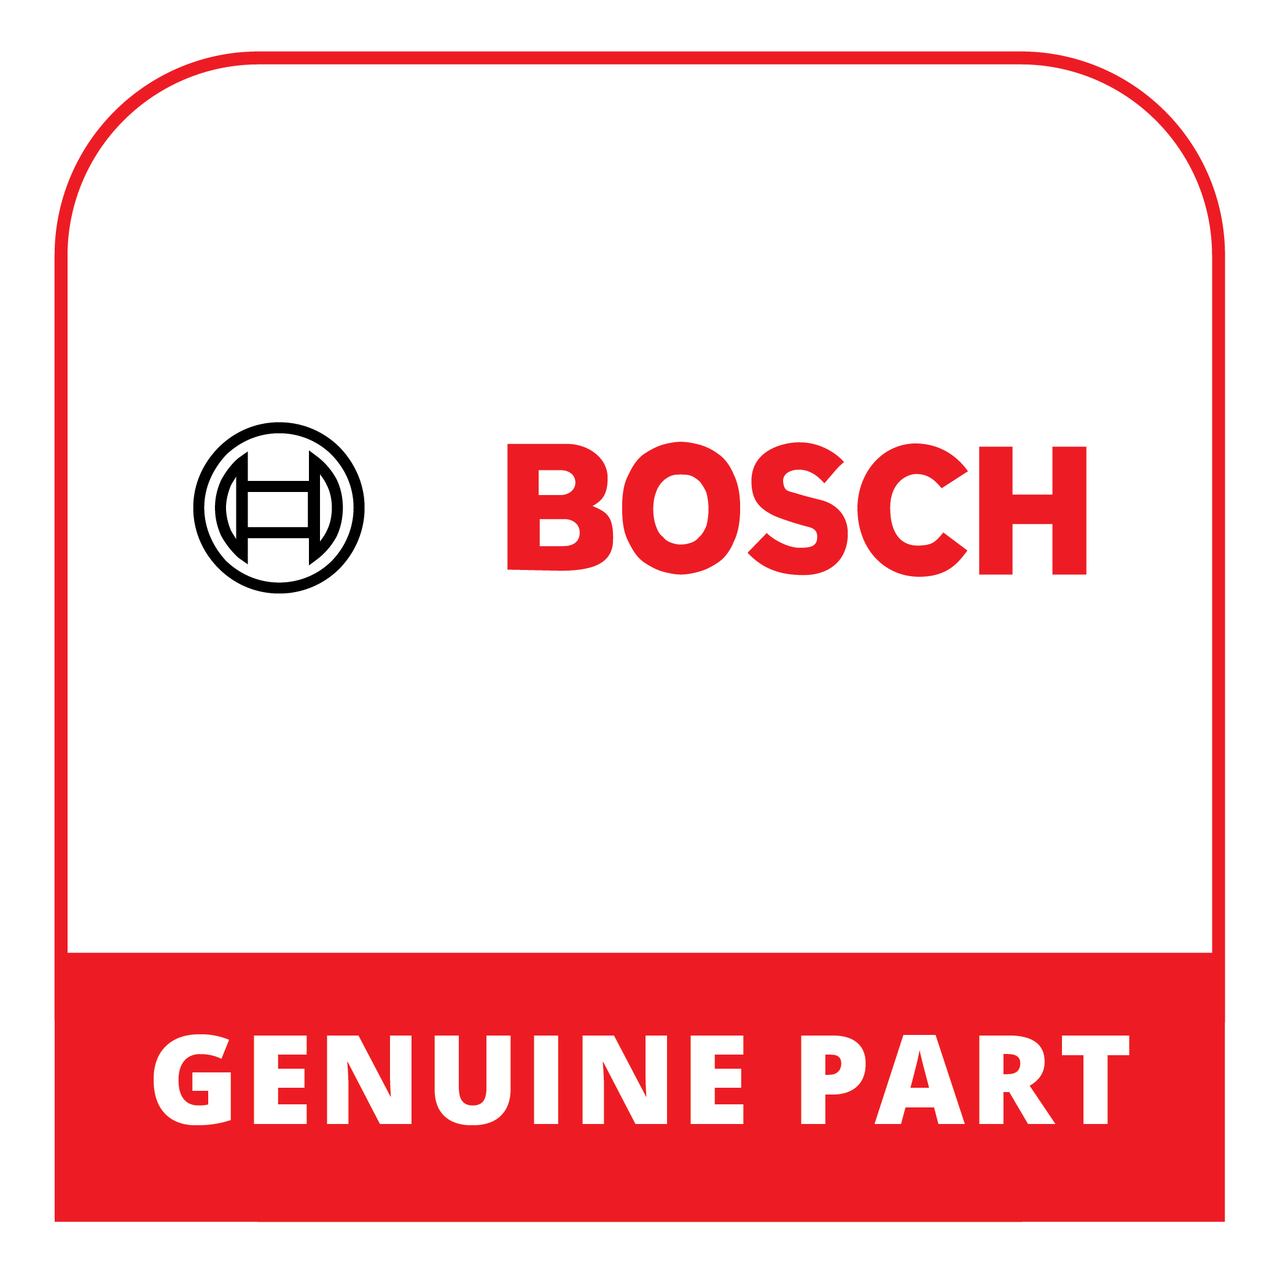 Bosch (Thermador) 11028393 - Power Module Programmed - Genuine Bosch (Thermador) Part